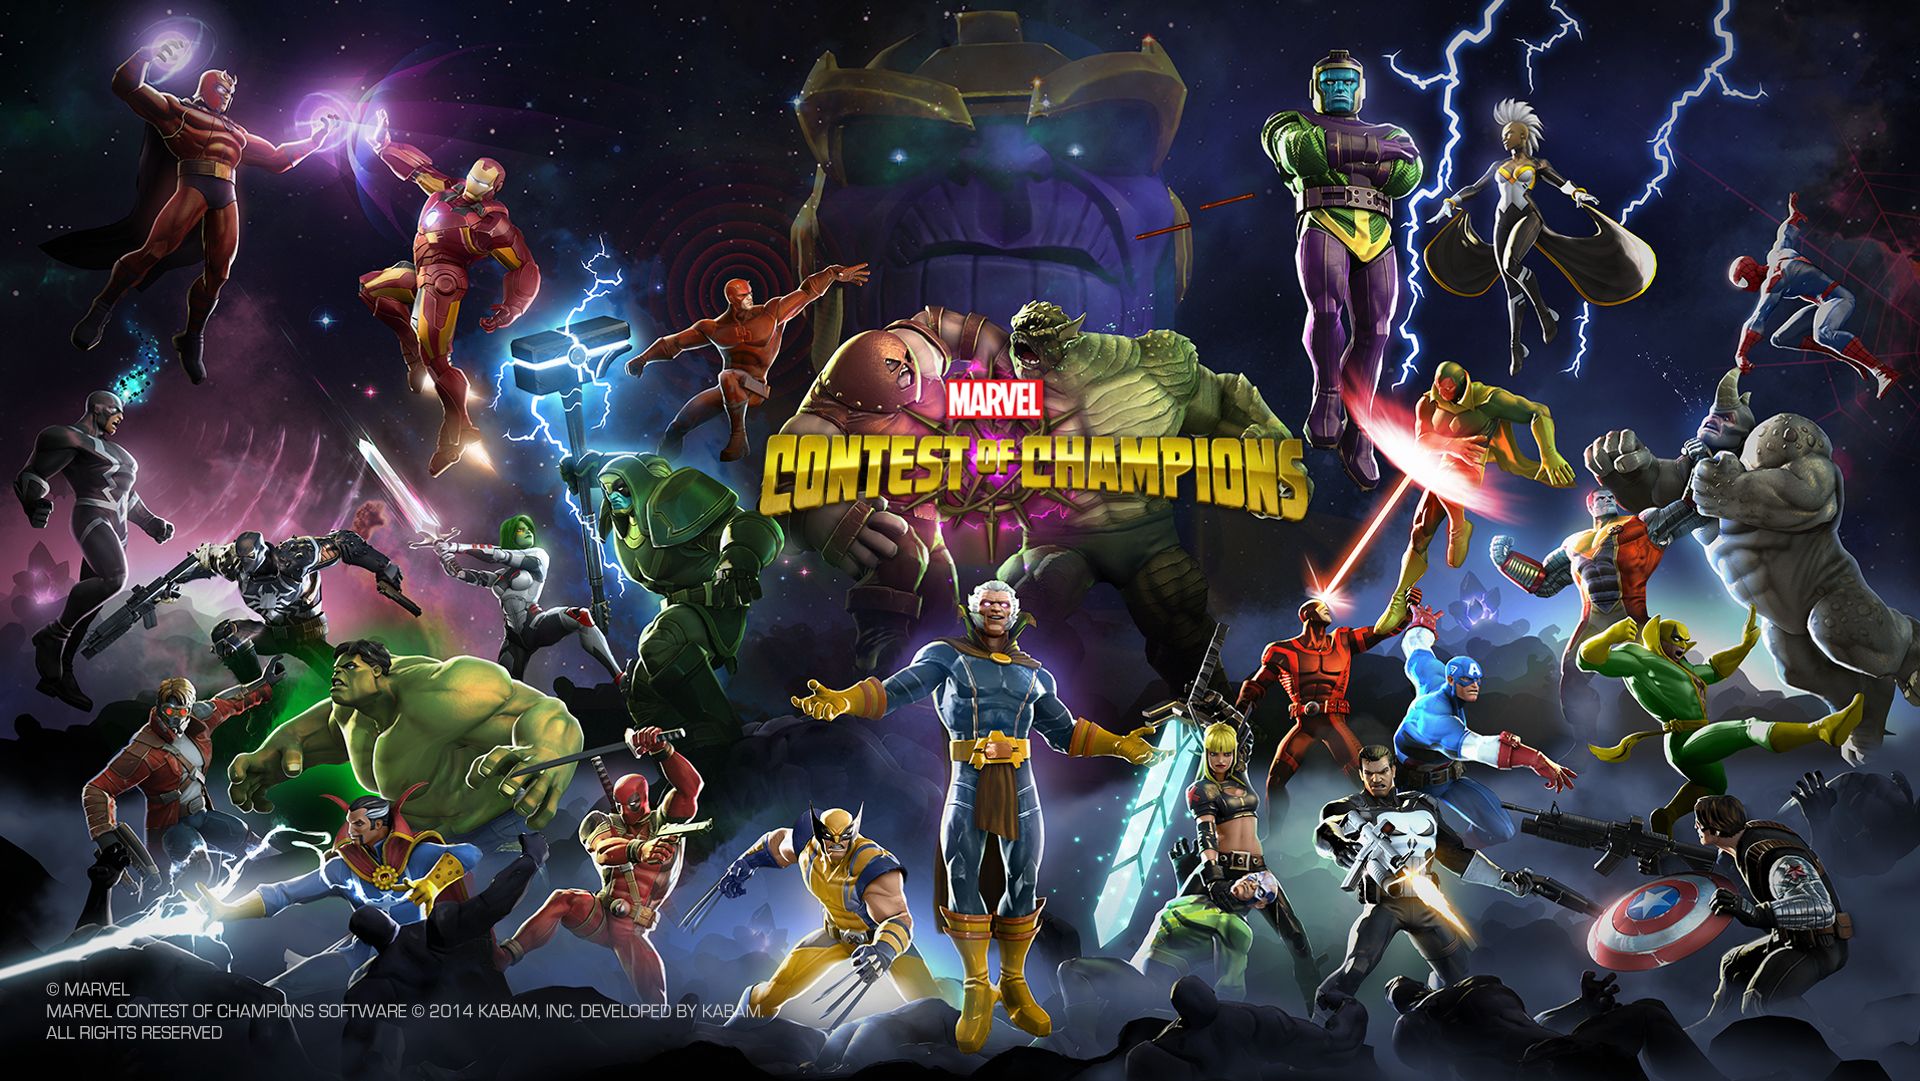 Marvel Contest Of Champions wallpapers for desktop, download free Marvel Contest Champions pictures and backgrounds for PC mob.org